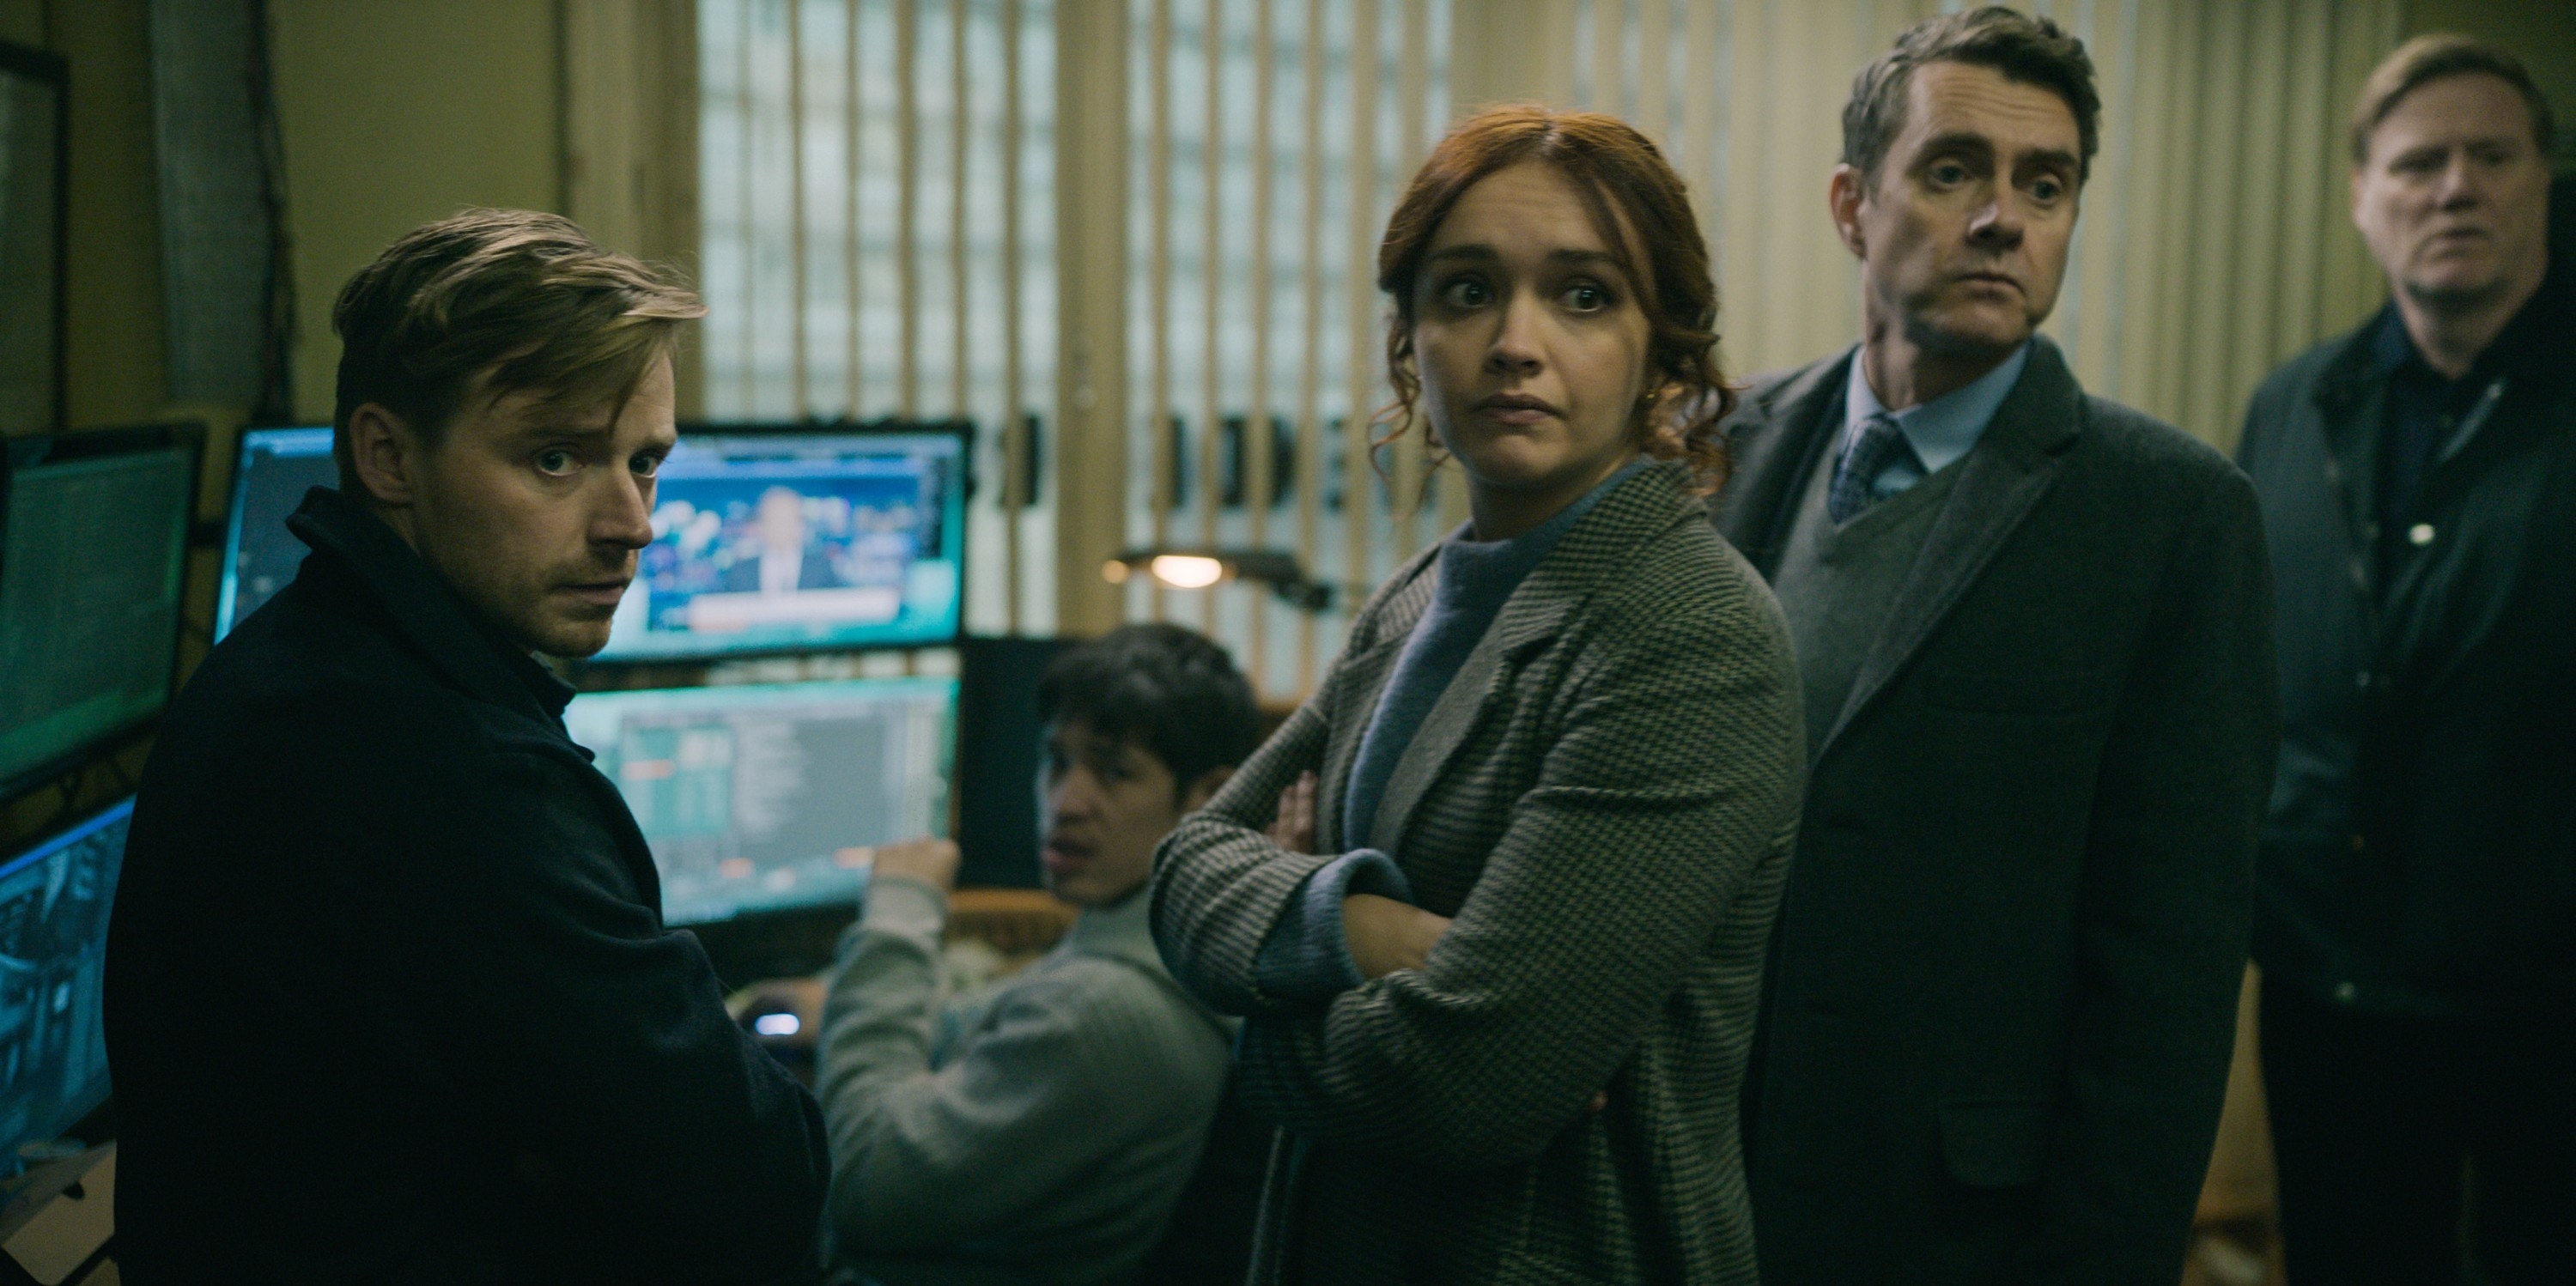 Jack Lowden, Christopher Chung, Olivia Cooke, and Paul Higgins huddle around a computer